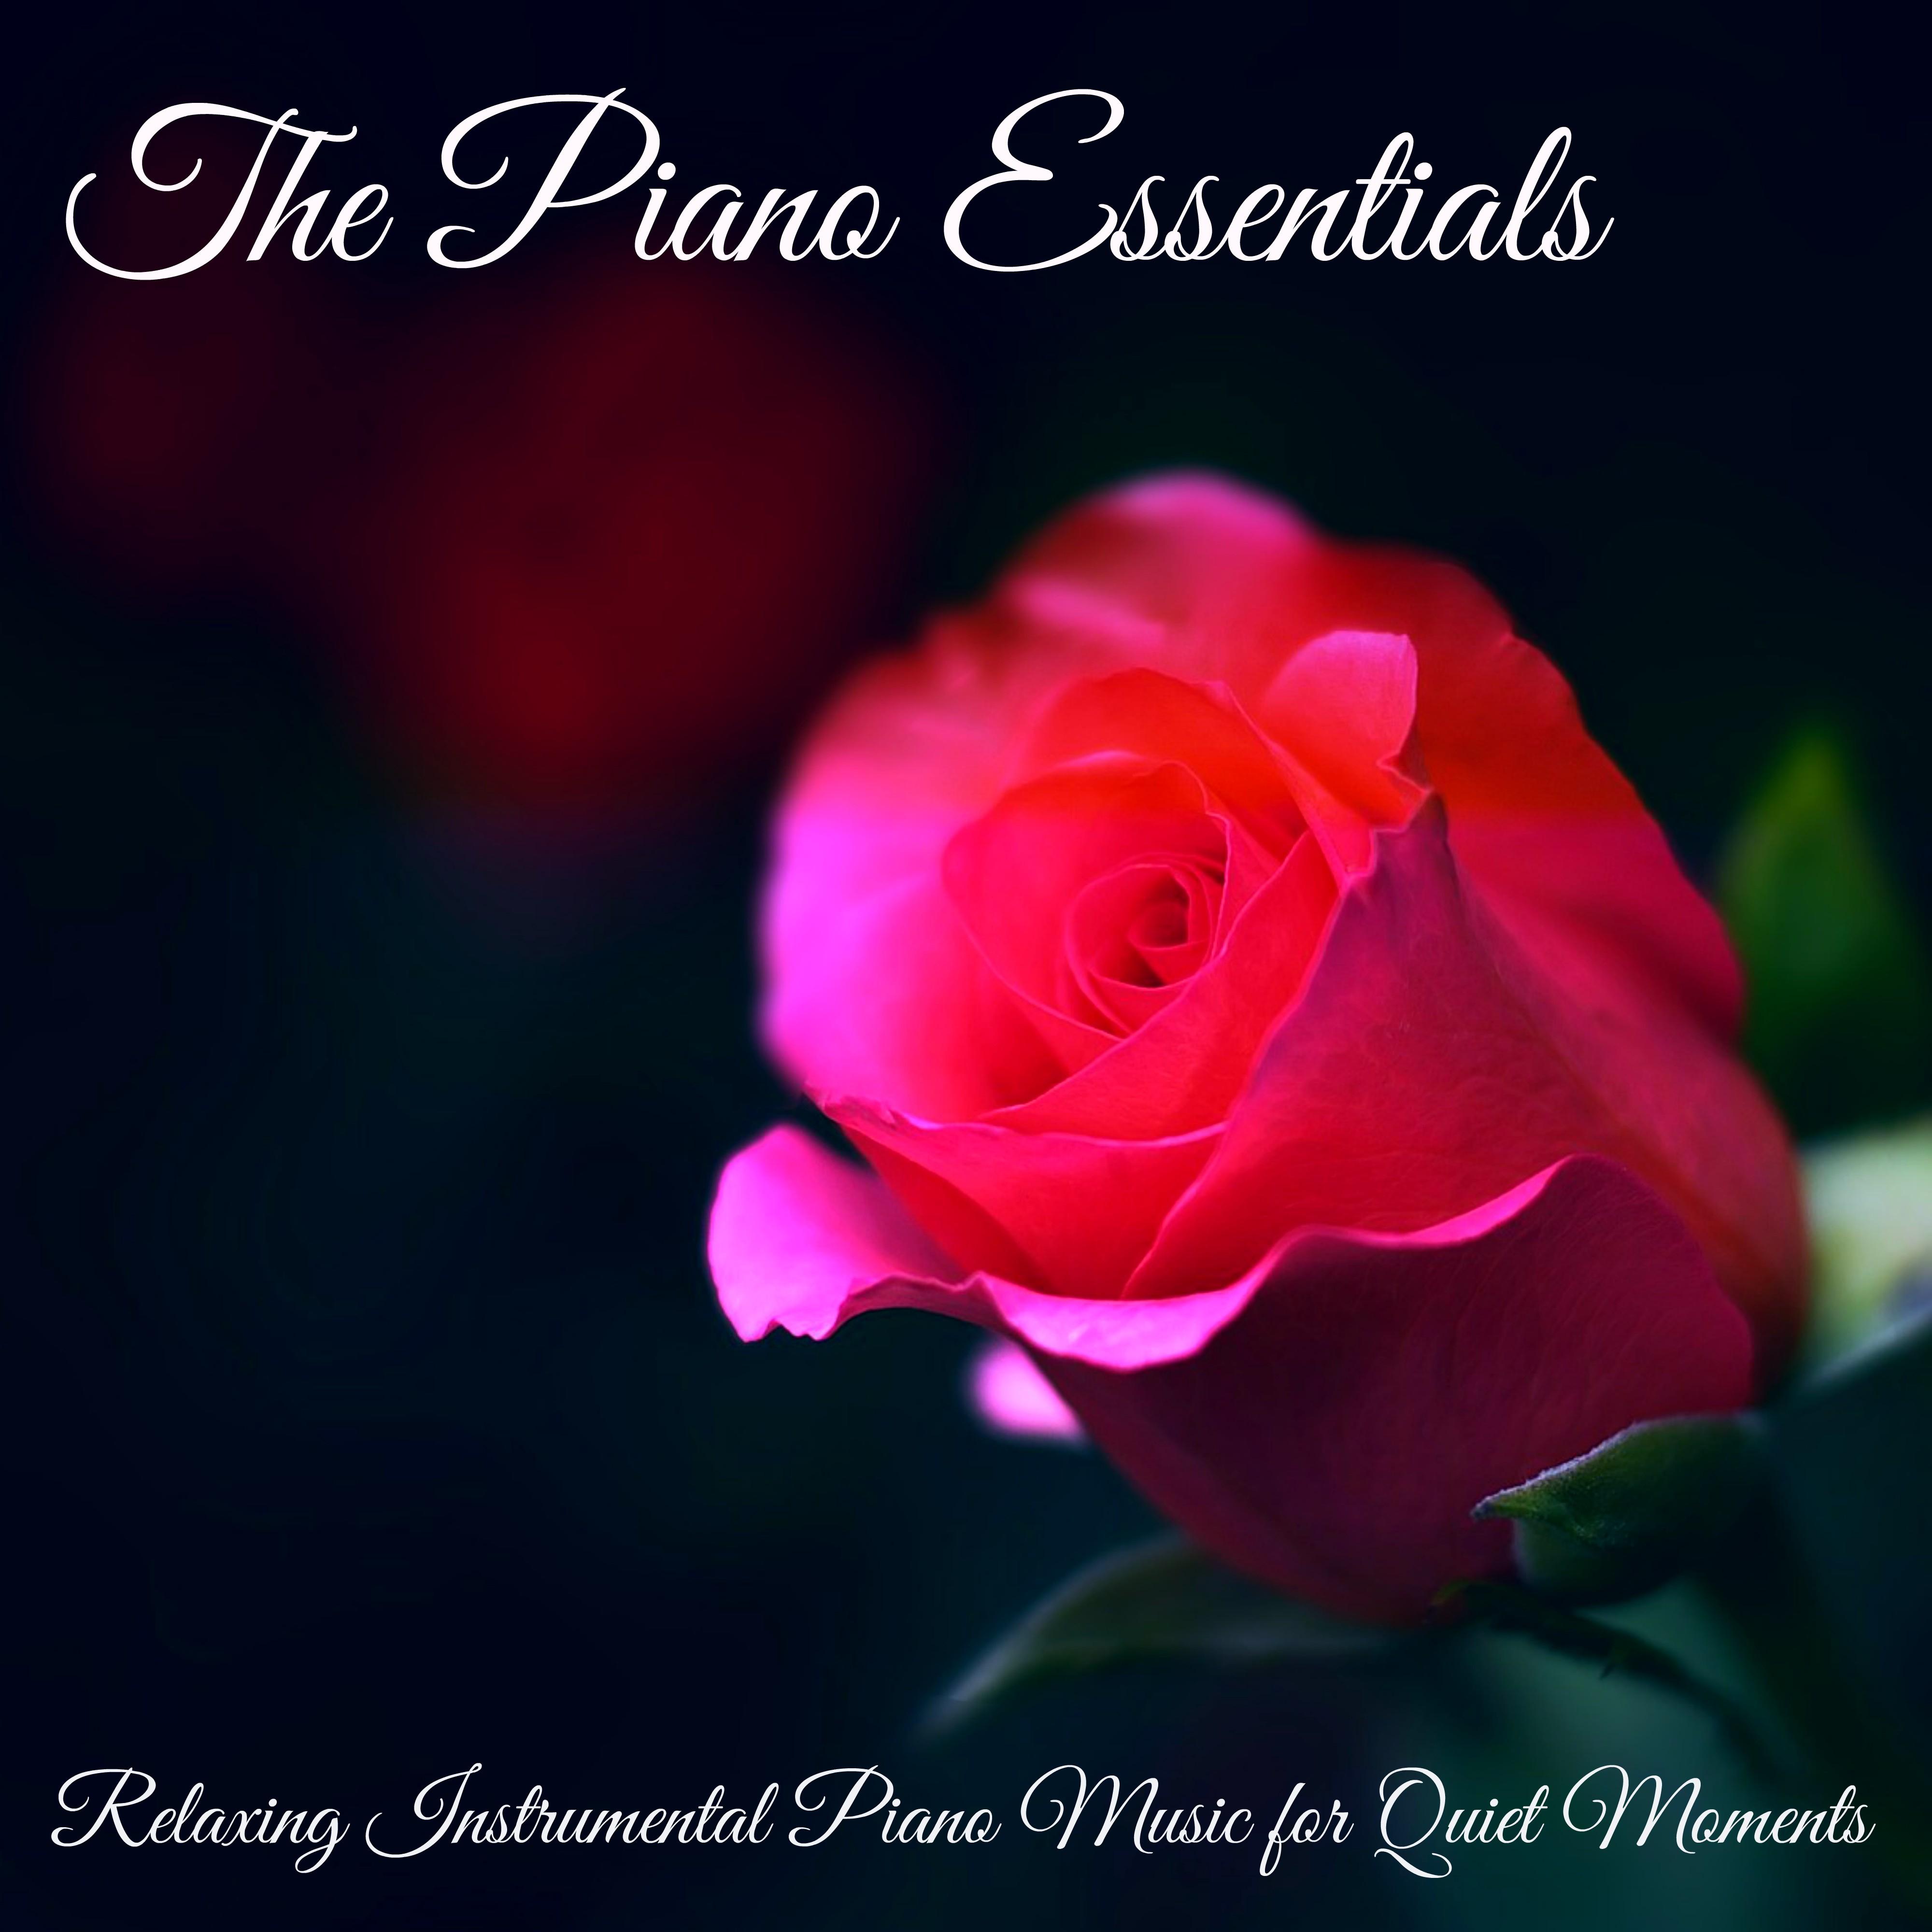 The Piano Essentials - Relaxing Instrumental Piano Music for Quiet Moments